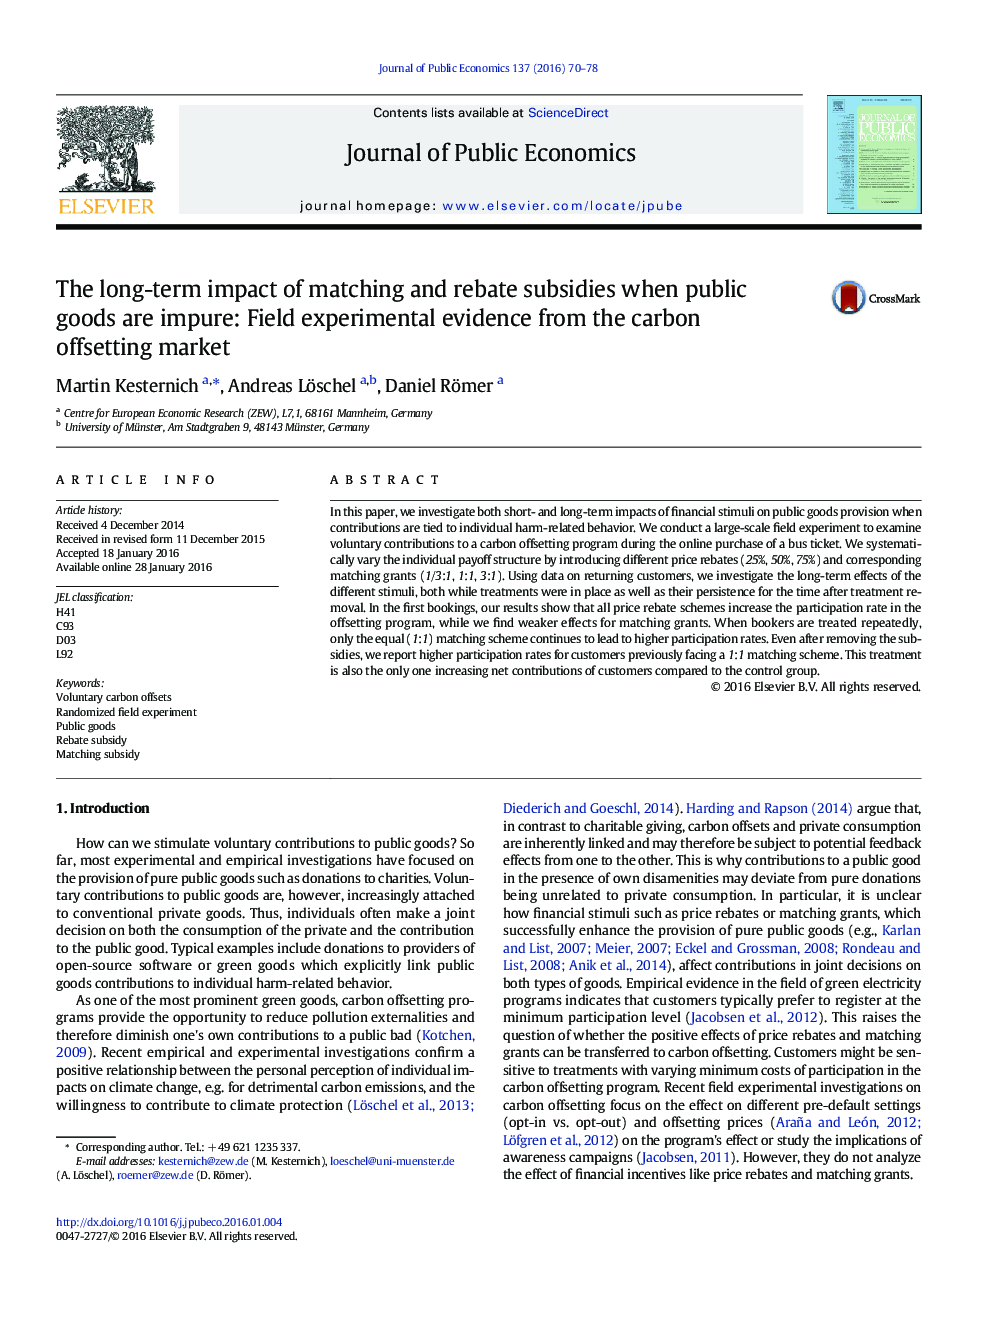 The long-term impact of matching and rebate subsidies when public goods are impure: Field experimental evidence from the carbon offsetting market